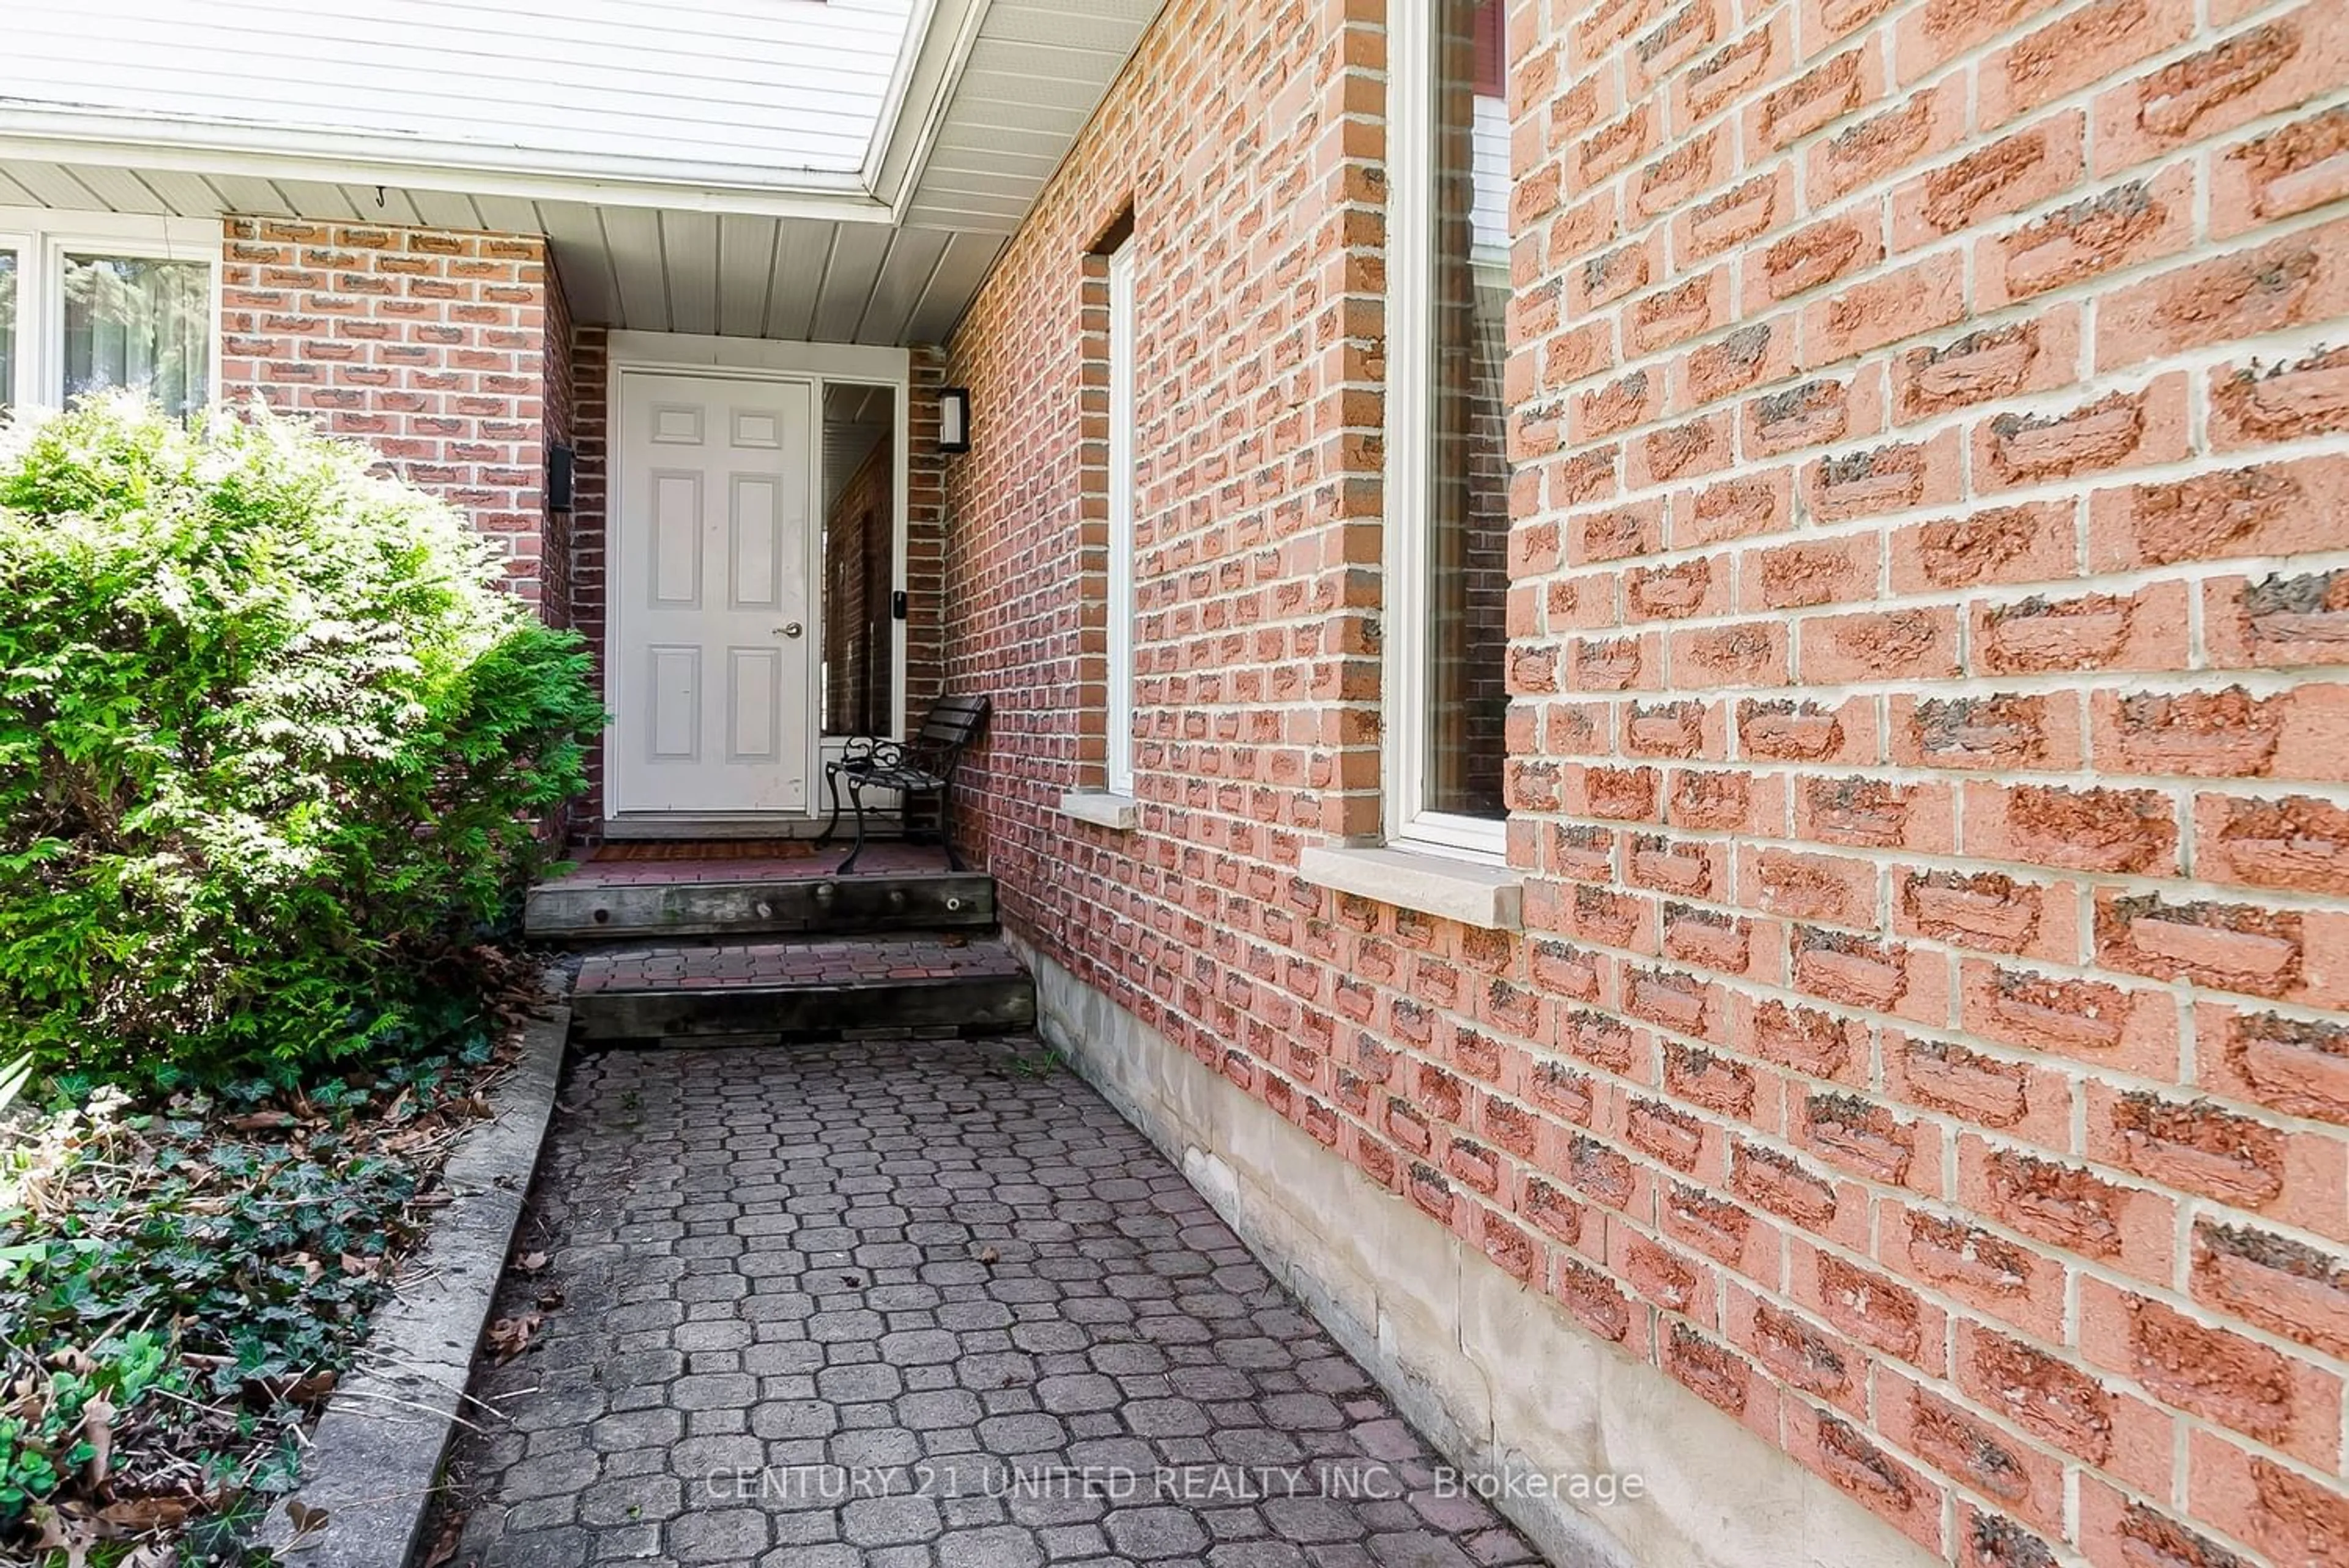 Home with brick exterior material for 3101 Frances Stewart Rd, Peterborough Ontario K9H 7J8